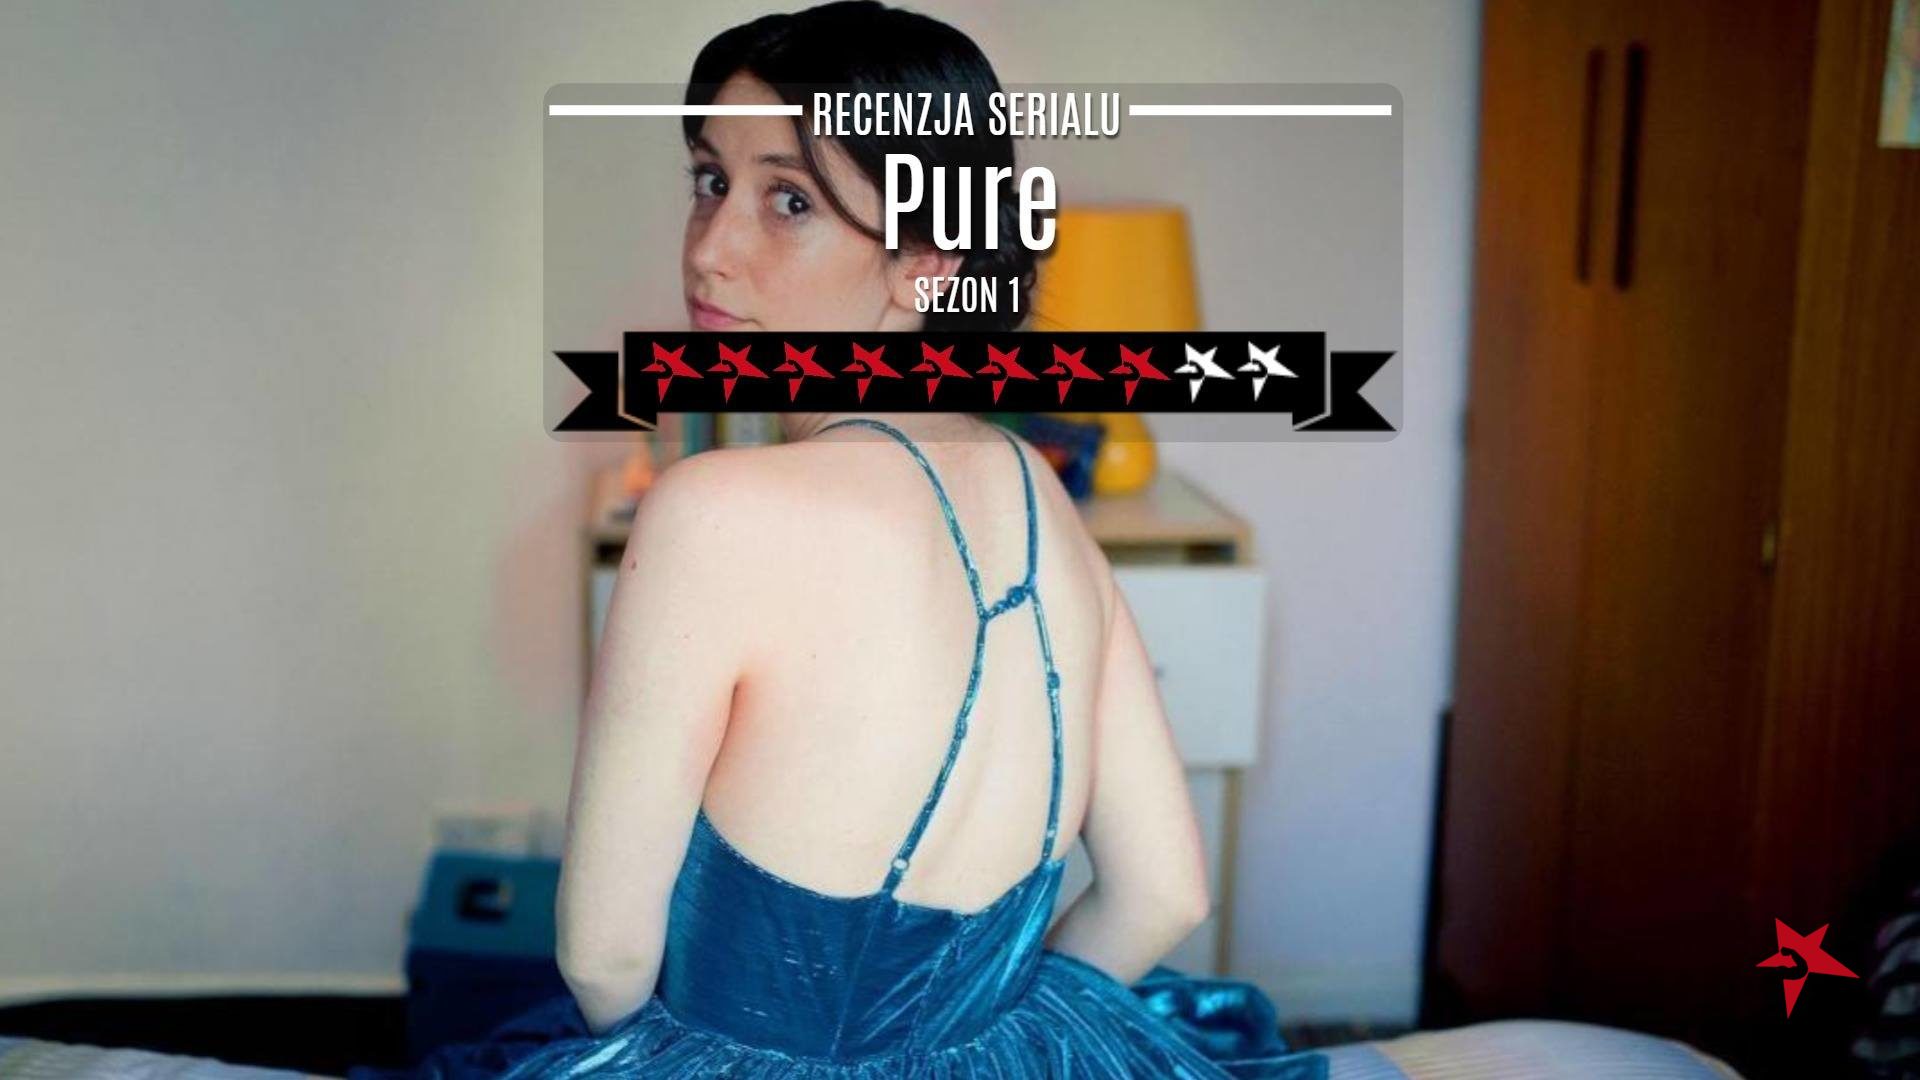 Pure 2019 serial recenzja channel 4